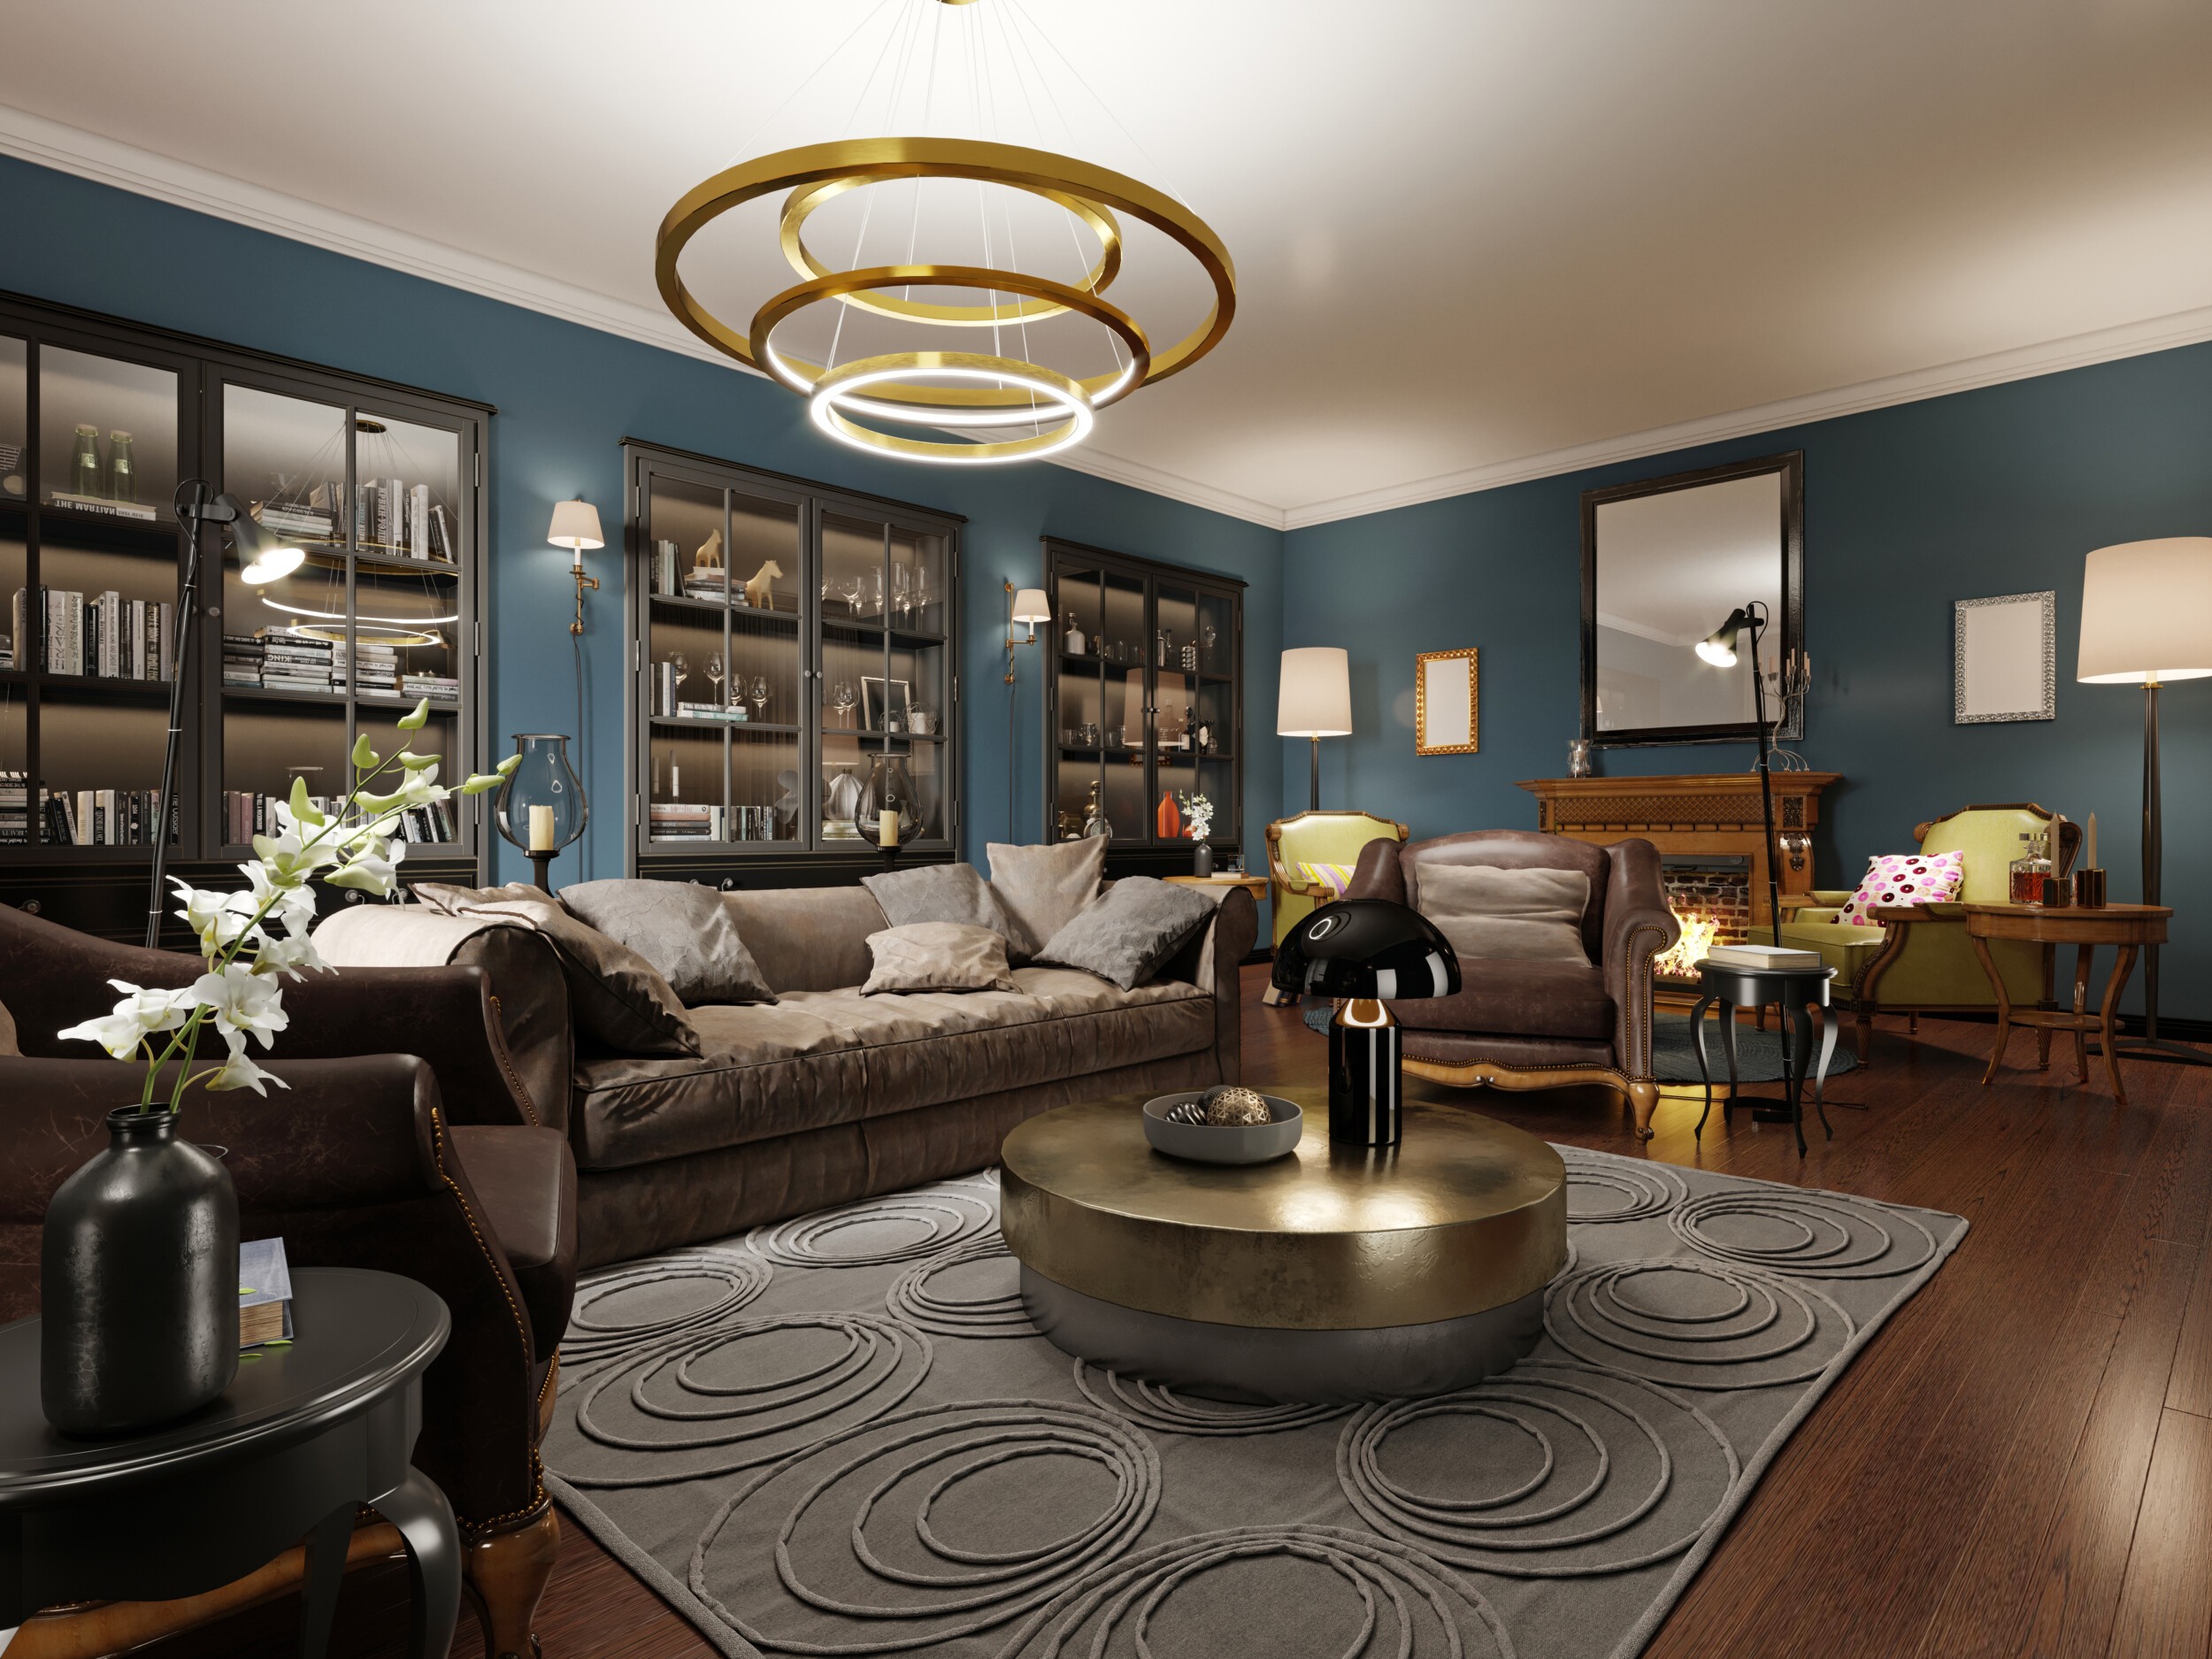 Hollywood Regency Interior Design: Get the Glam Look of the 1930s